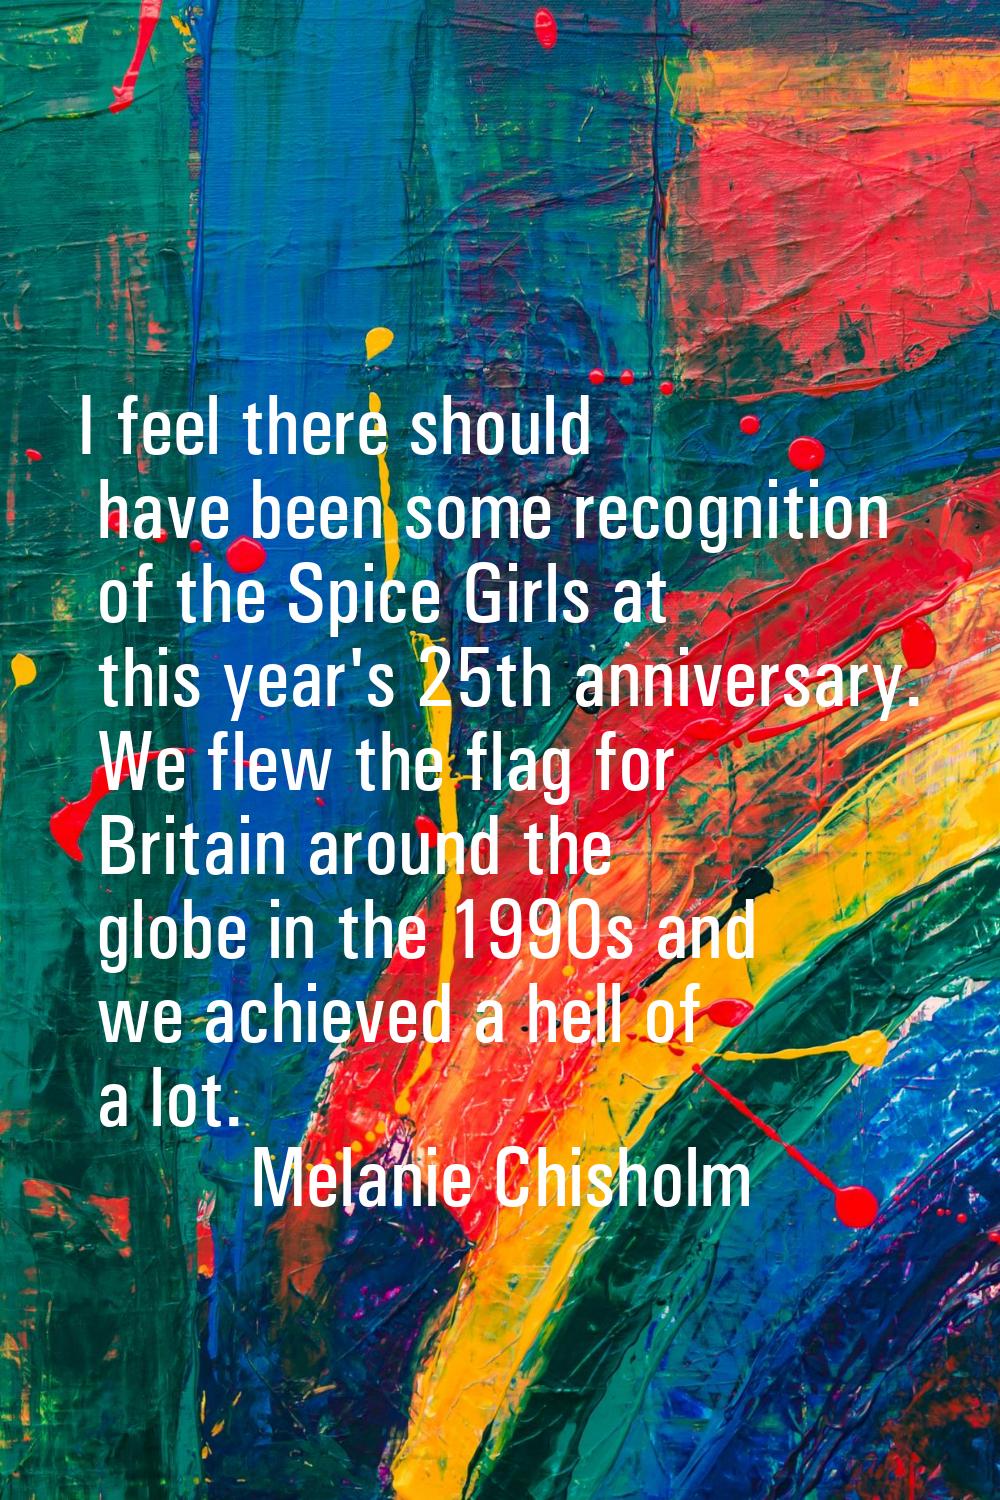 I feel there should have been some recognition of the Spice Girls at this year's 25th anniversary. 